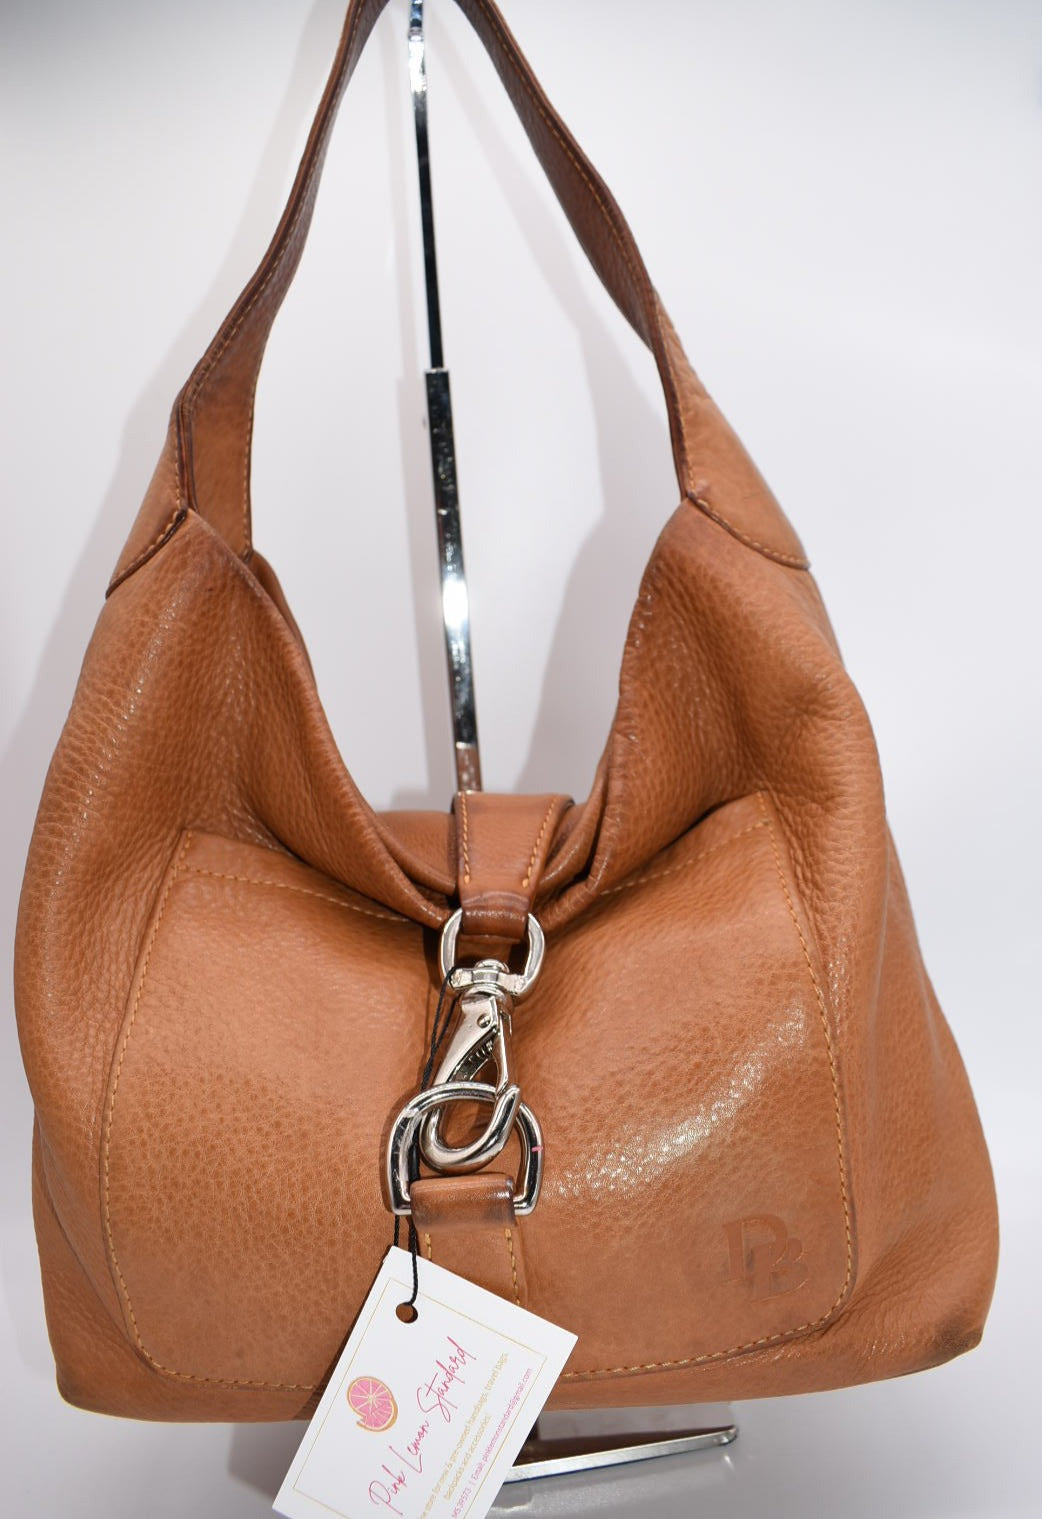 Women's Accessories, Shoulder Bags, Totes & Duffle Bags